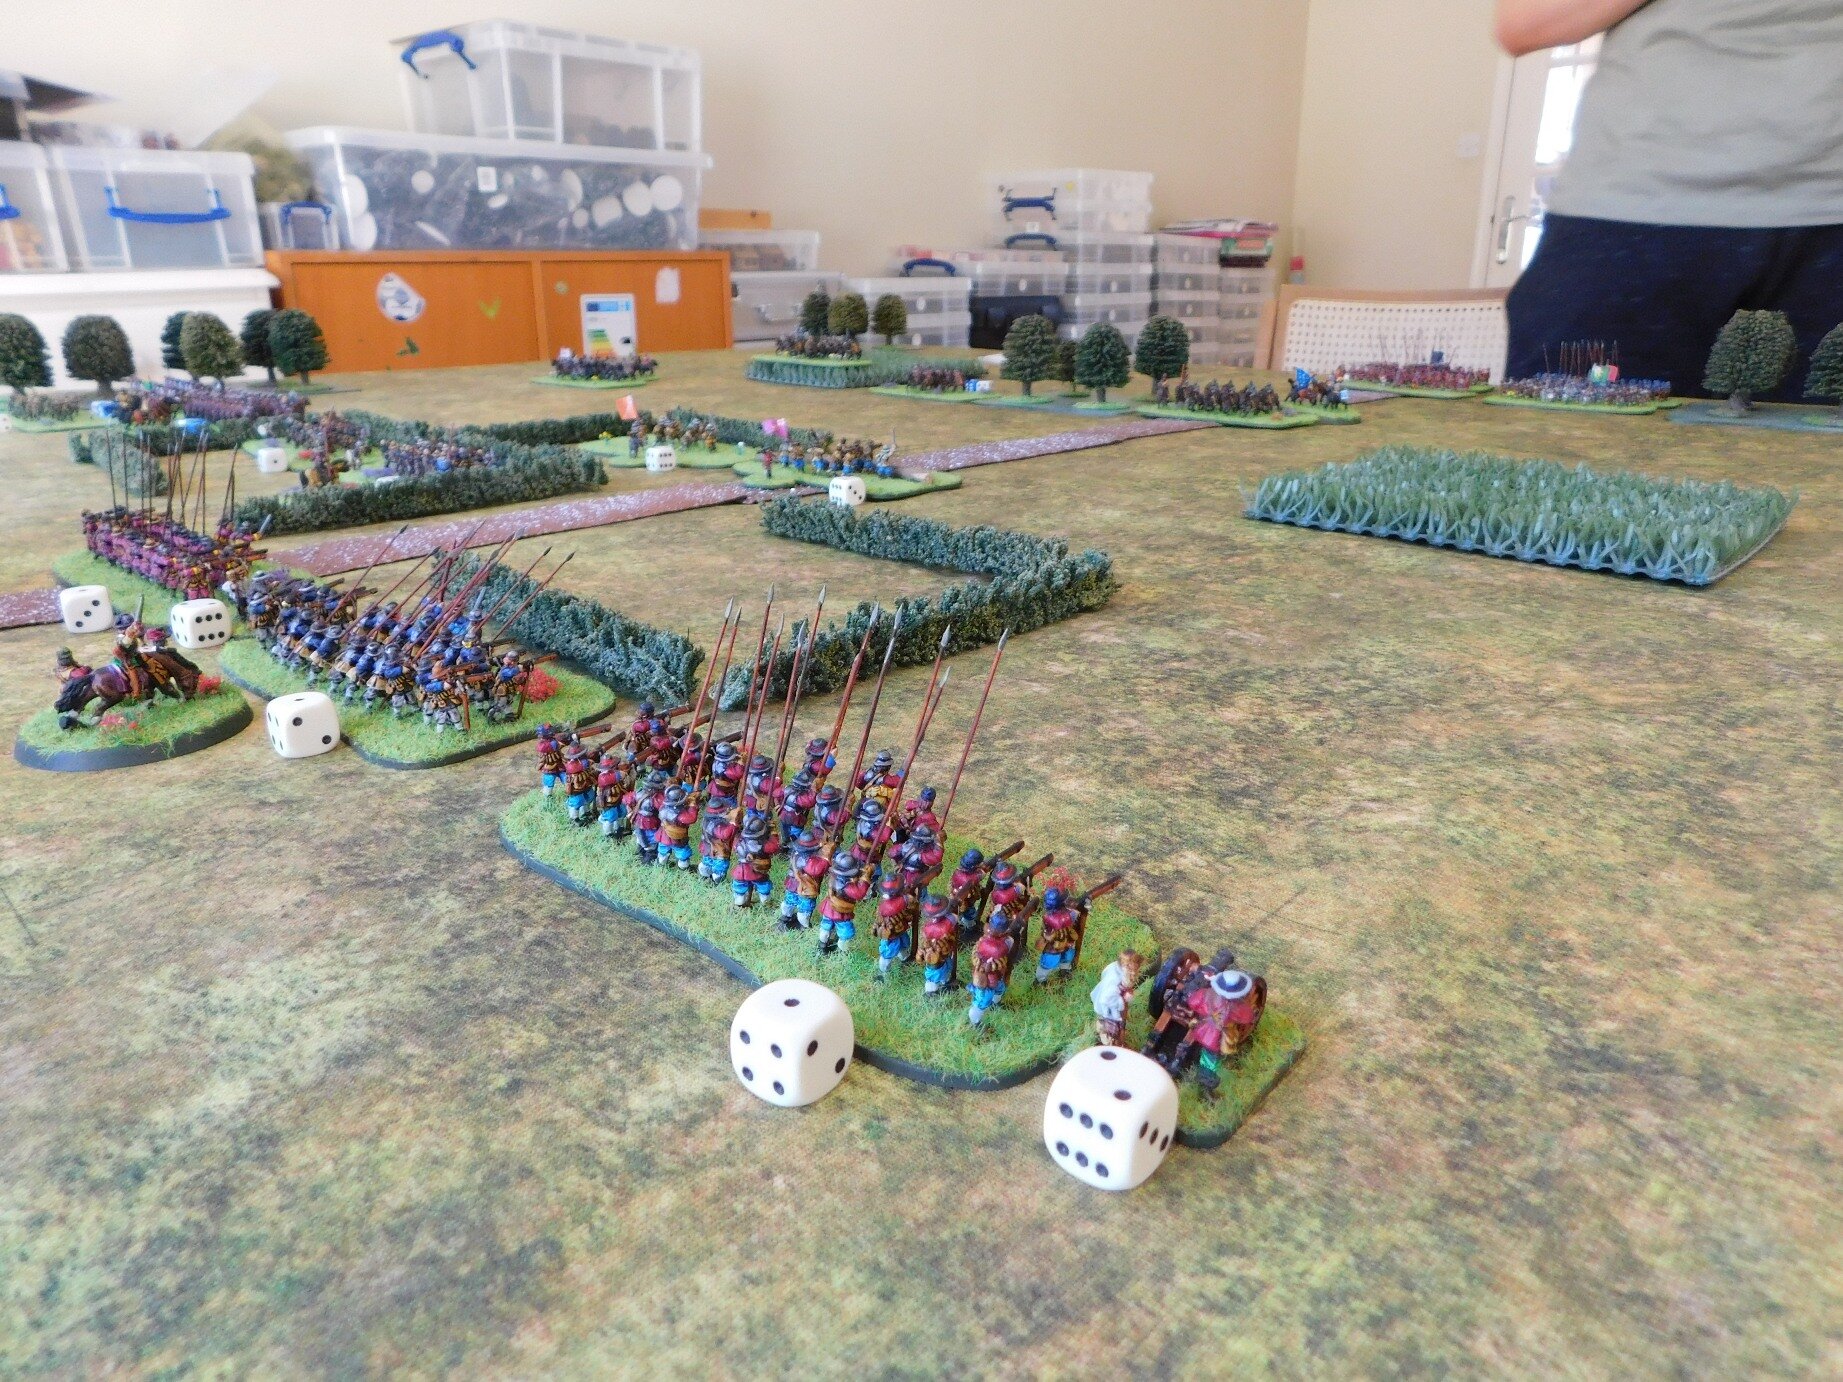 In the centre: my pike-heavy infantry 